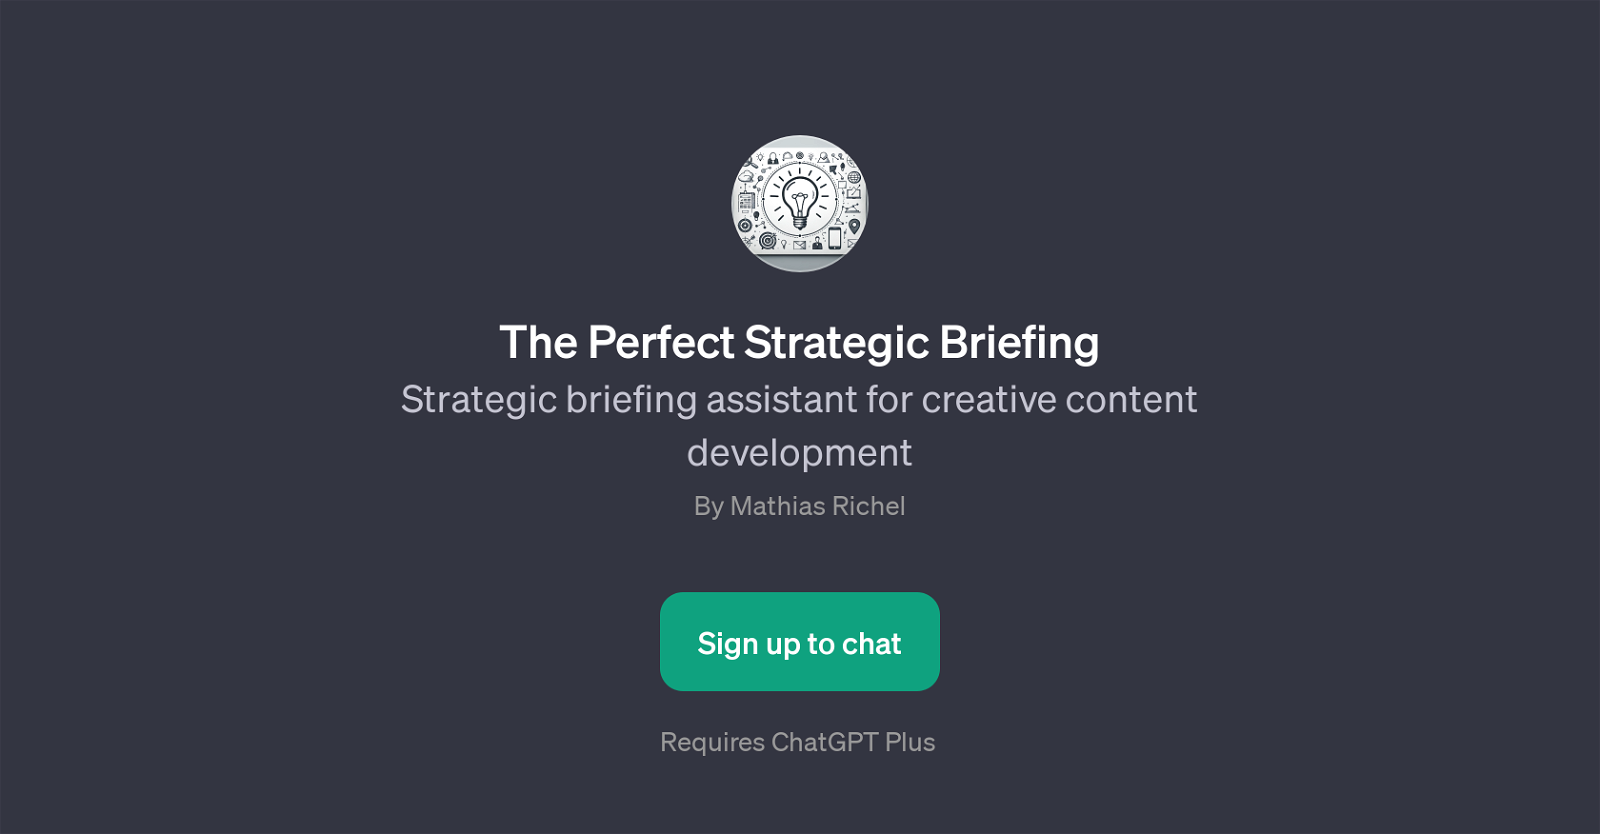 The Perfect Strategic Briefing website